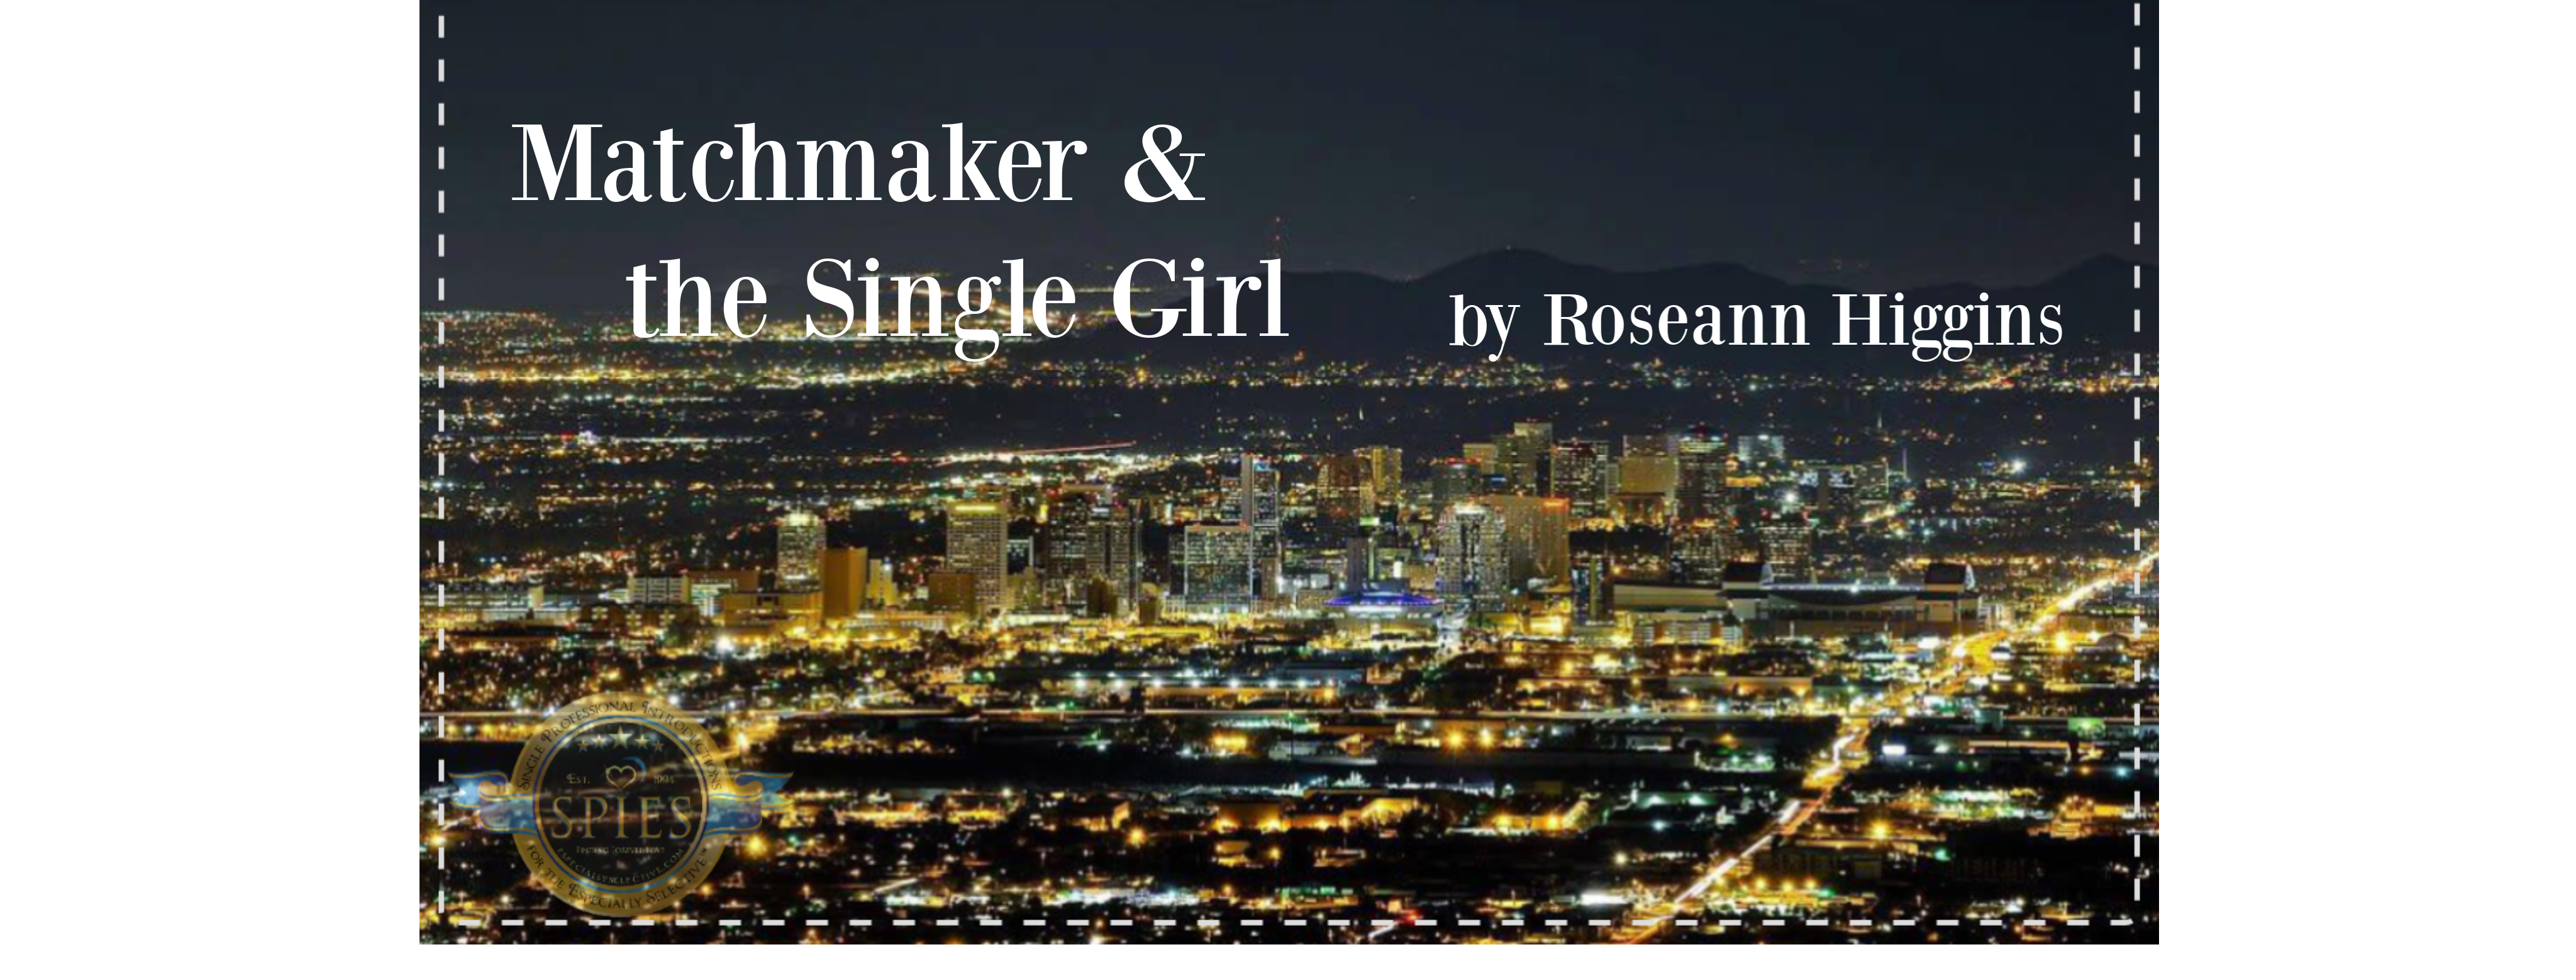 The Single Matchmaker by J.J. Arias